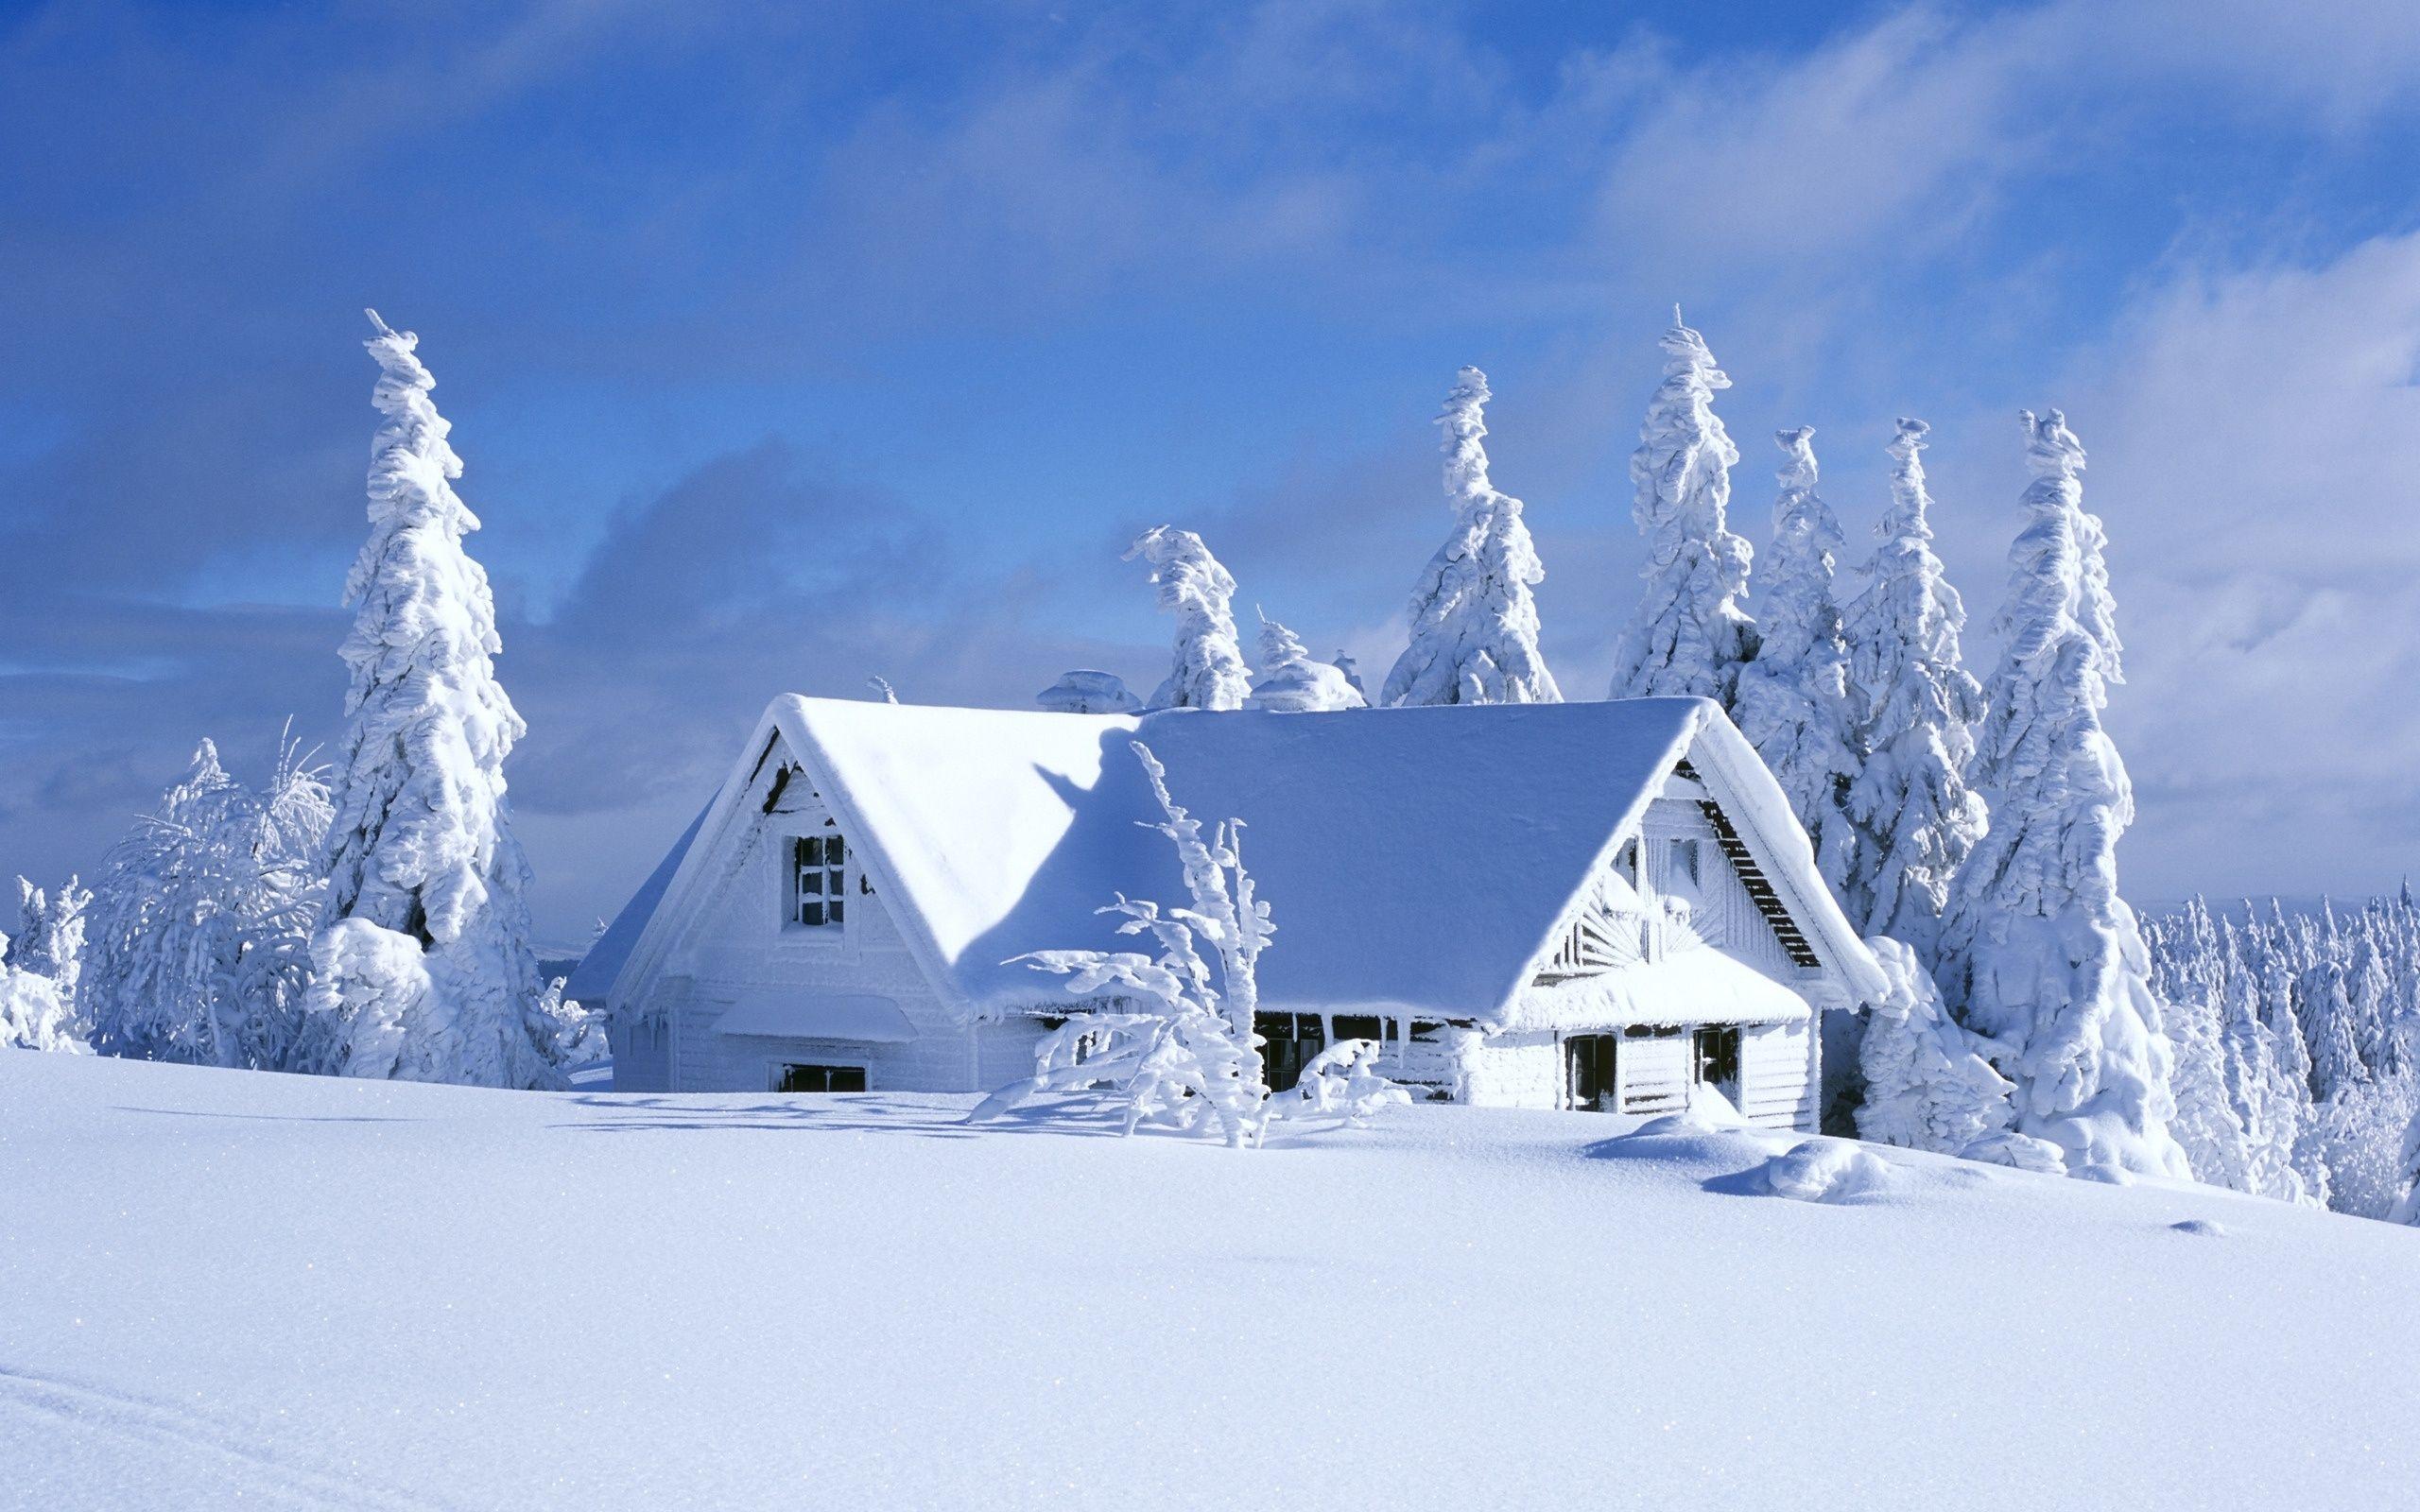 House Covered In Snow wallpaper. Winter snow